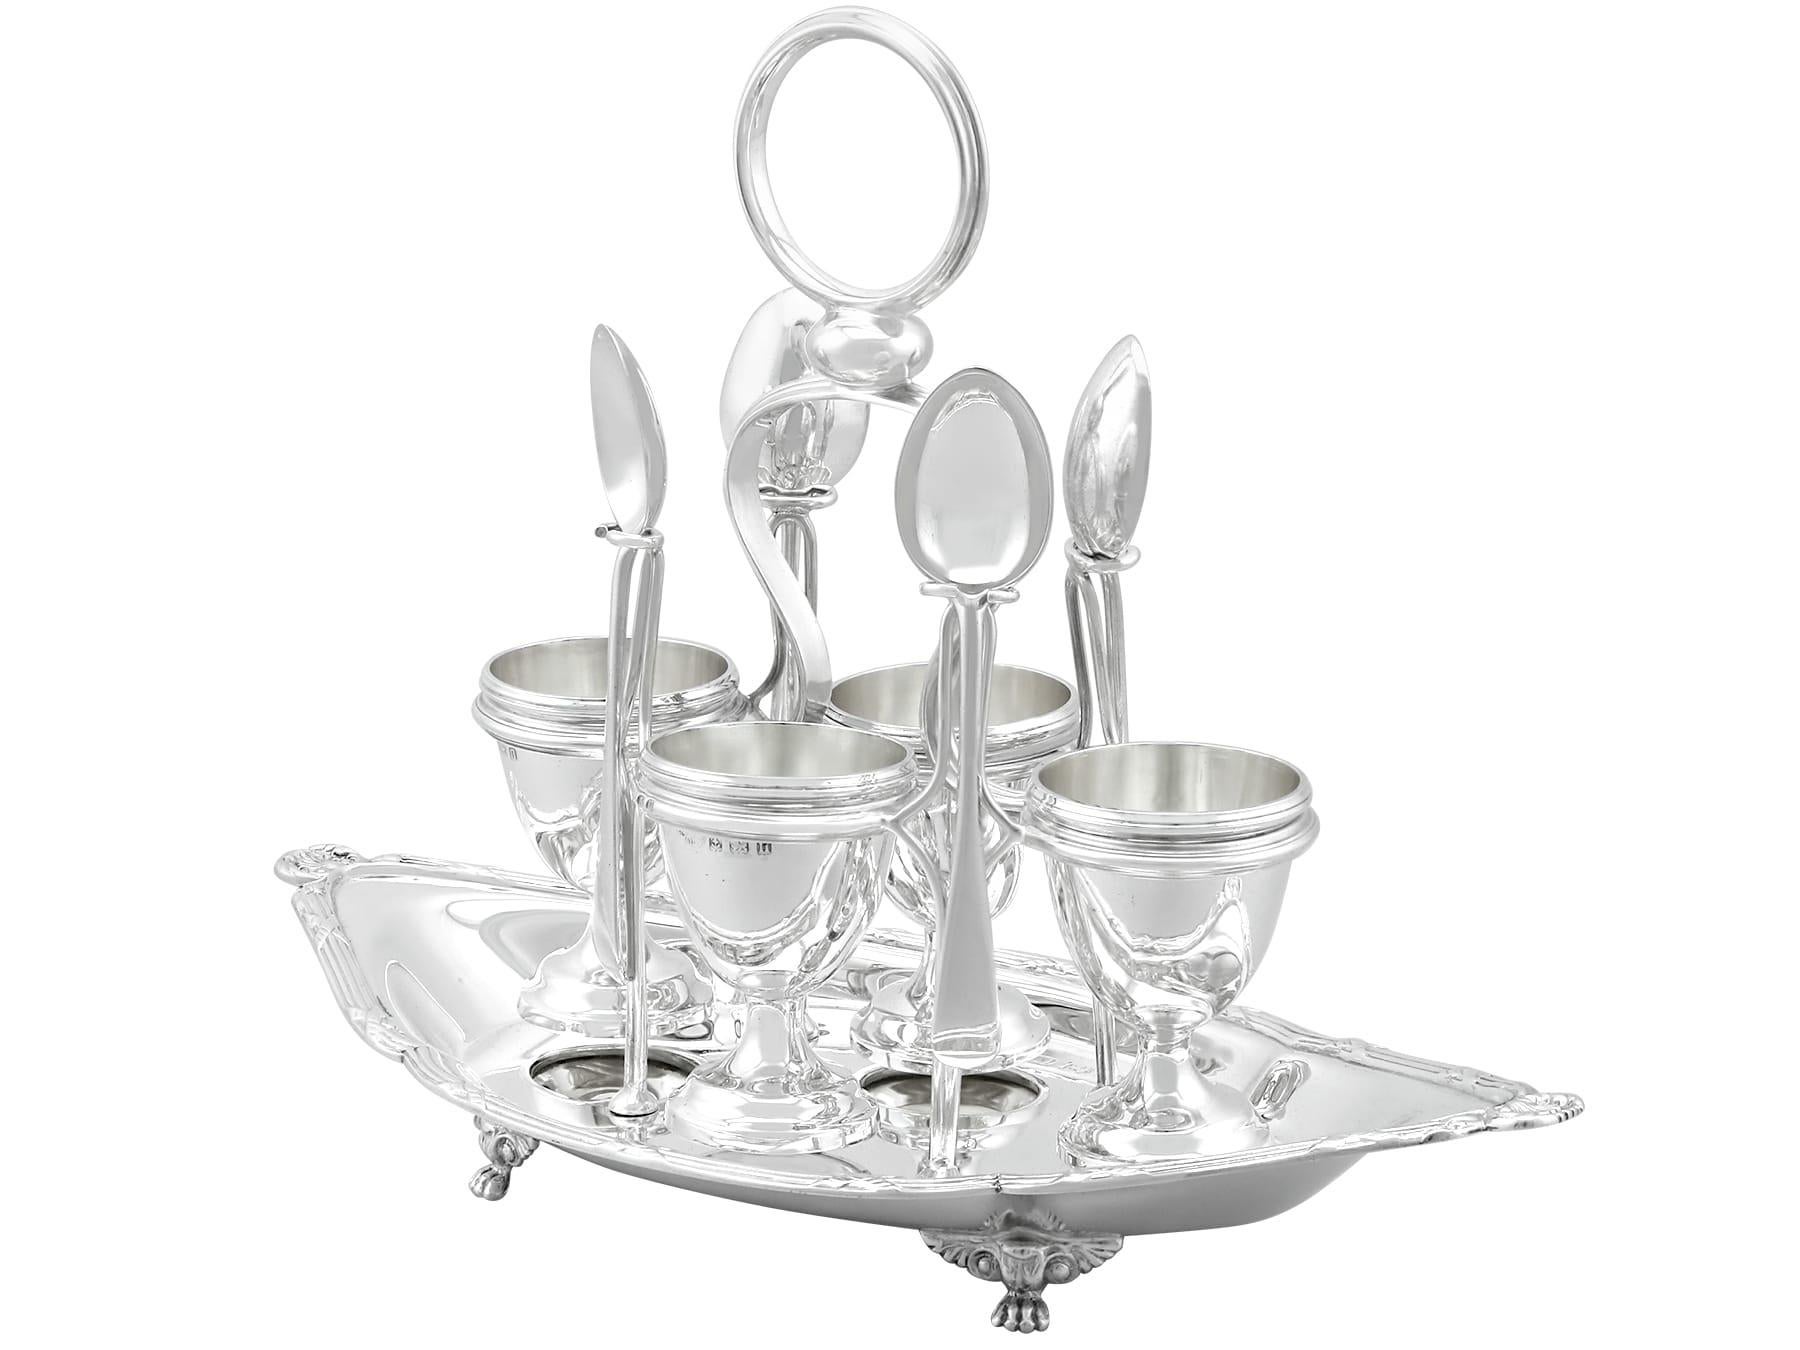 An exceptional, fine and impressive, antique George V English sterling silver egg cruet set with spoons for four persons; part of our dining silverware collection

This exceptional antique sterling silver egg cruet set consists of four egg cups